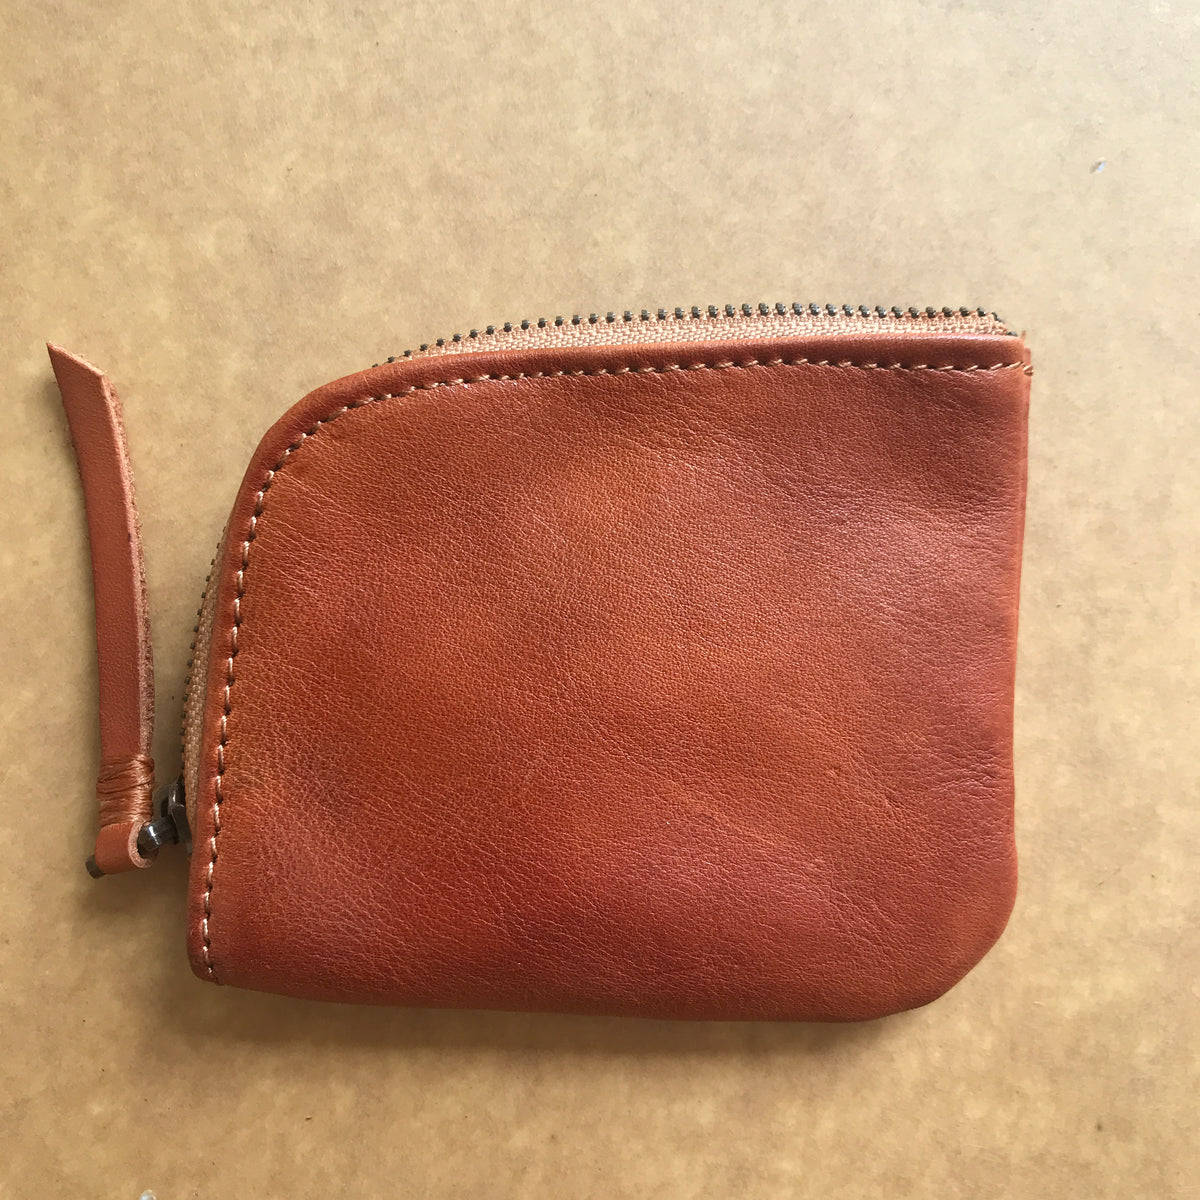 Custom leather gifts as your personal gifts or corporate gifts